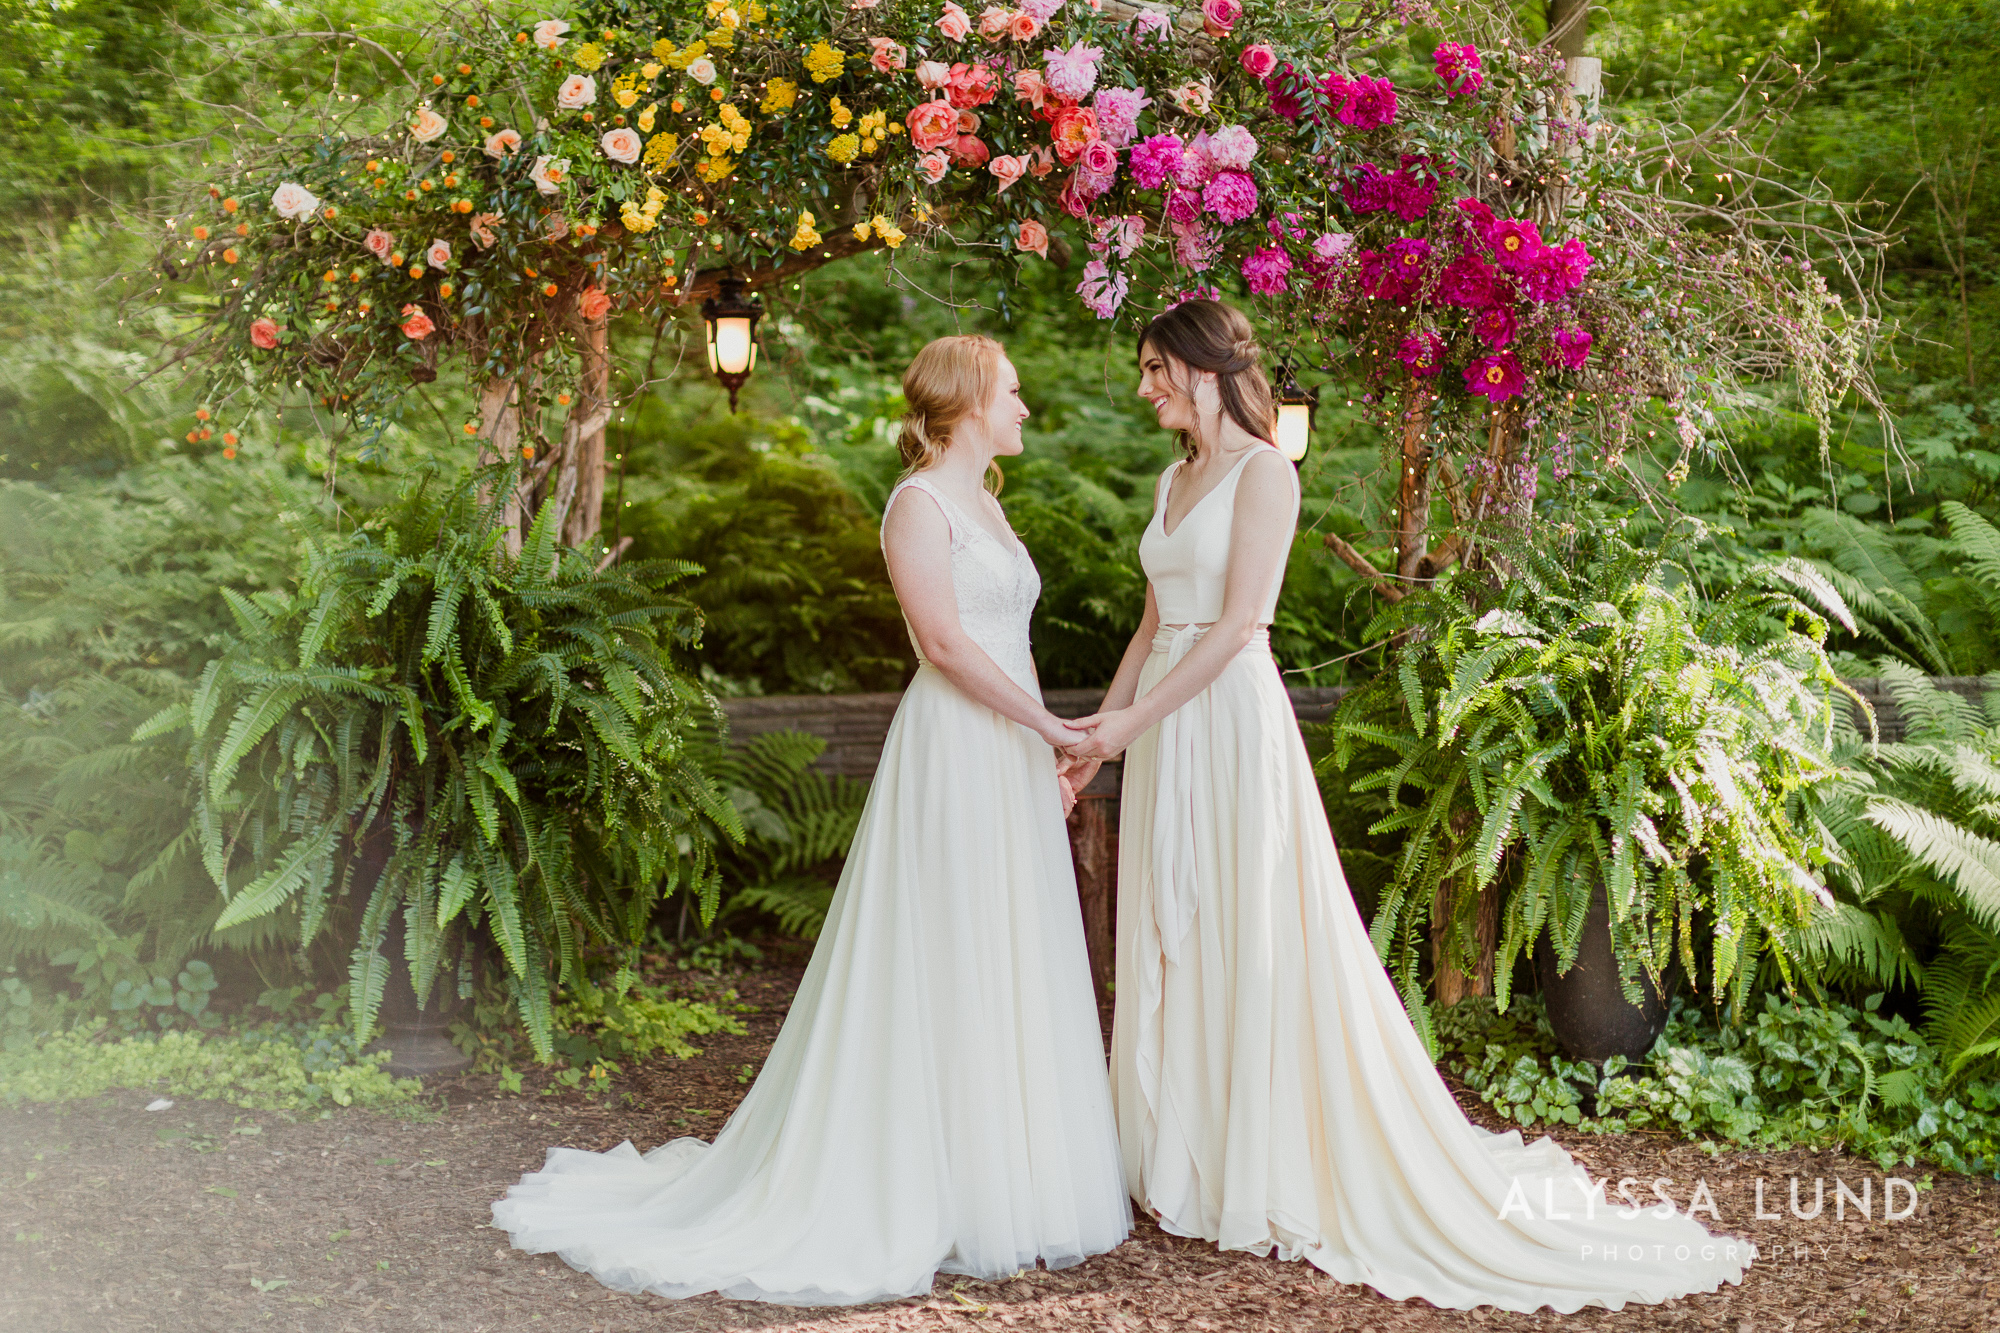 Queer wedding photography inspiration by Alyssa Lund Photography-21.jpg